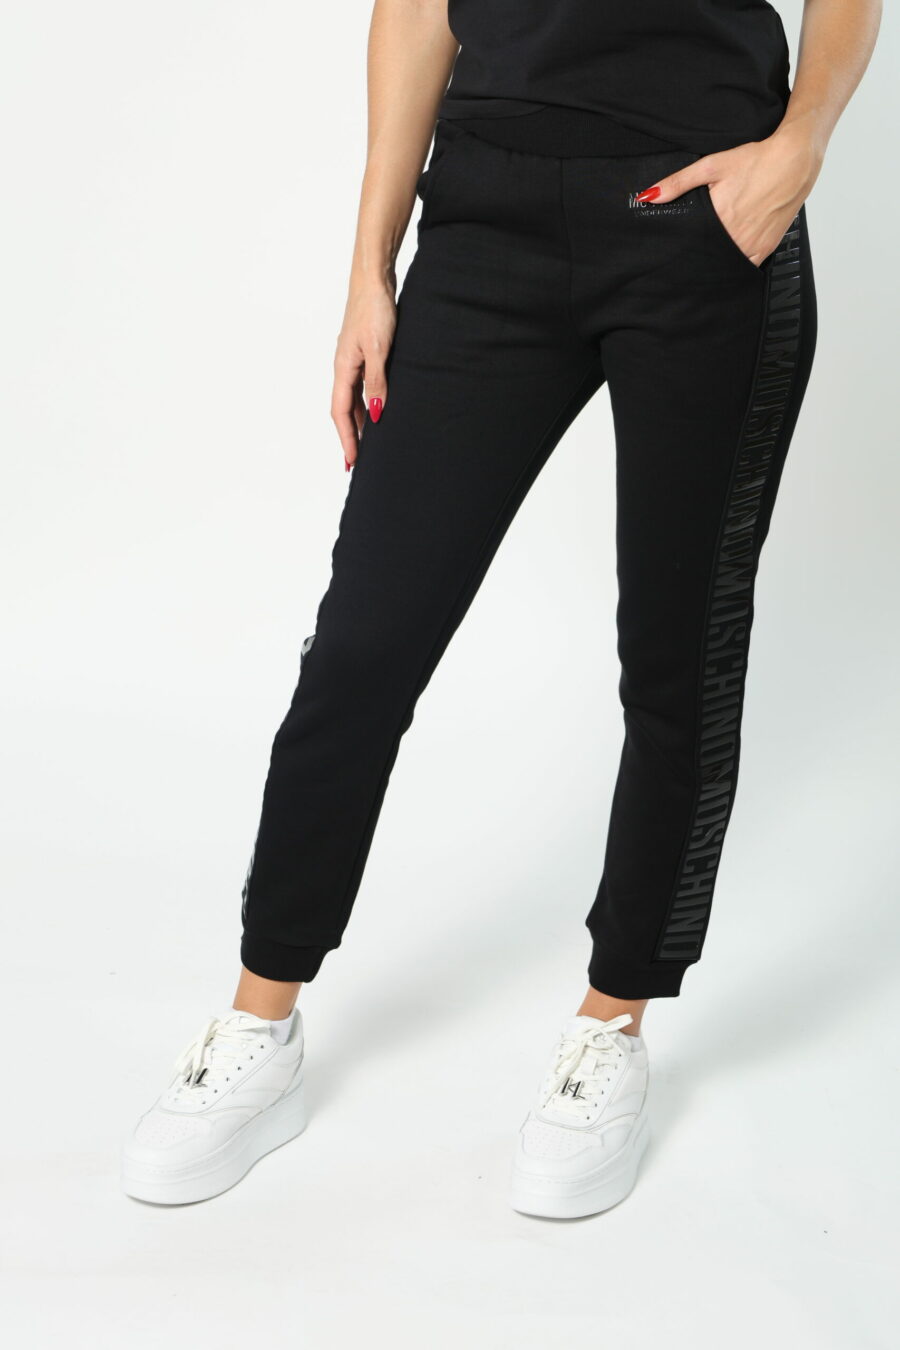 Tracksuit bottoms black with monochrome ribbon logo on sides - 8052865435499 462 scaled